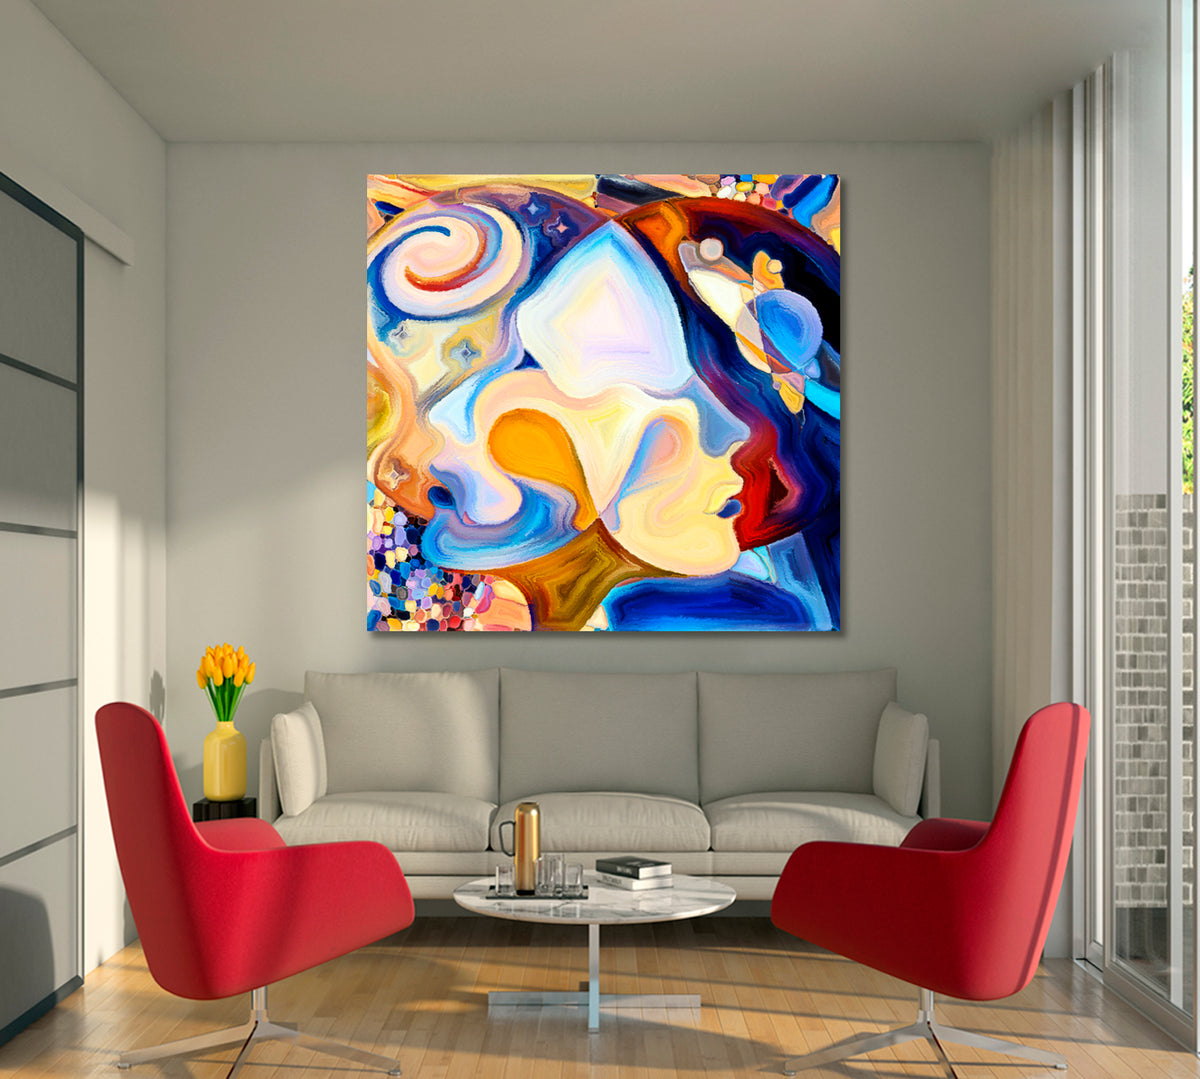 MALE AND FEMALE Abstract Multicolor Shapes - Square Panel Abstract Art Print Artesty 1 Panel 12"x12" 